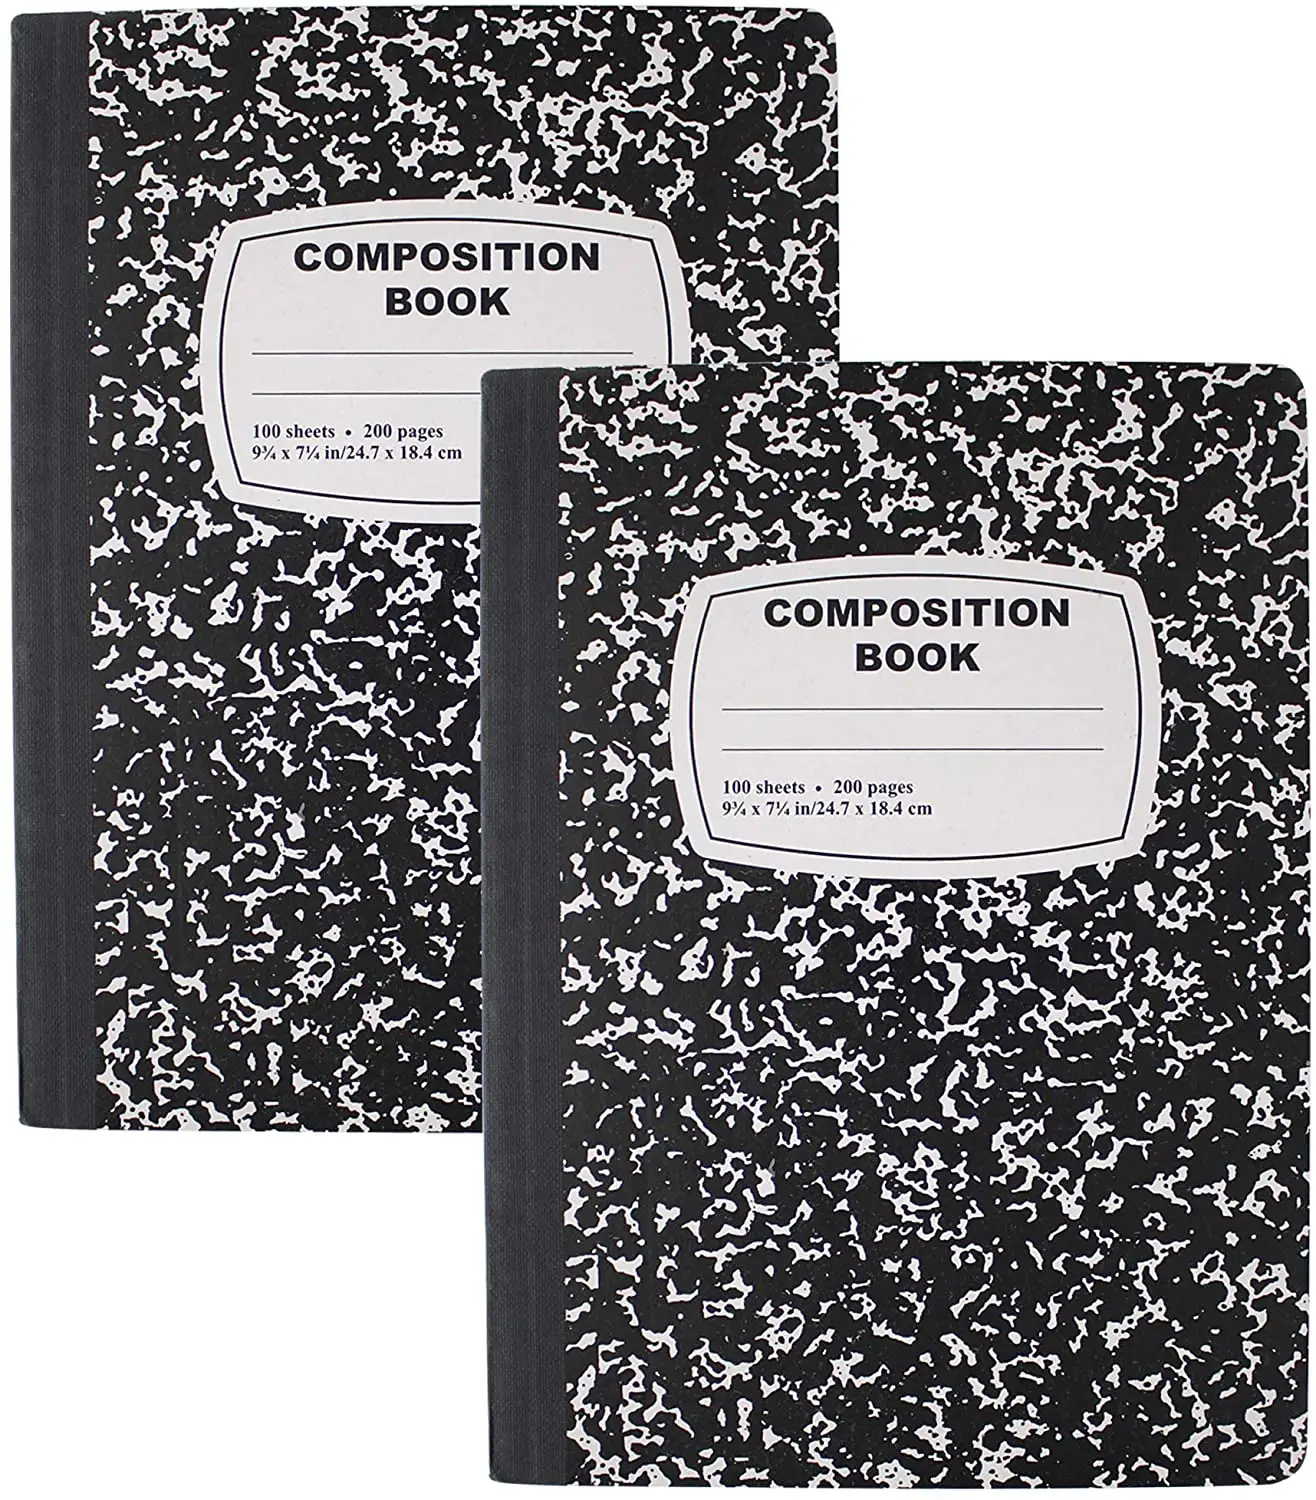 Black White Marble Style Cover Composition Book Wide Ruled White Paper school books for students